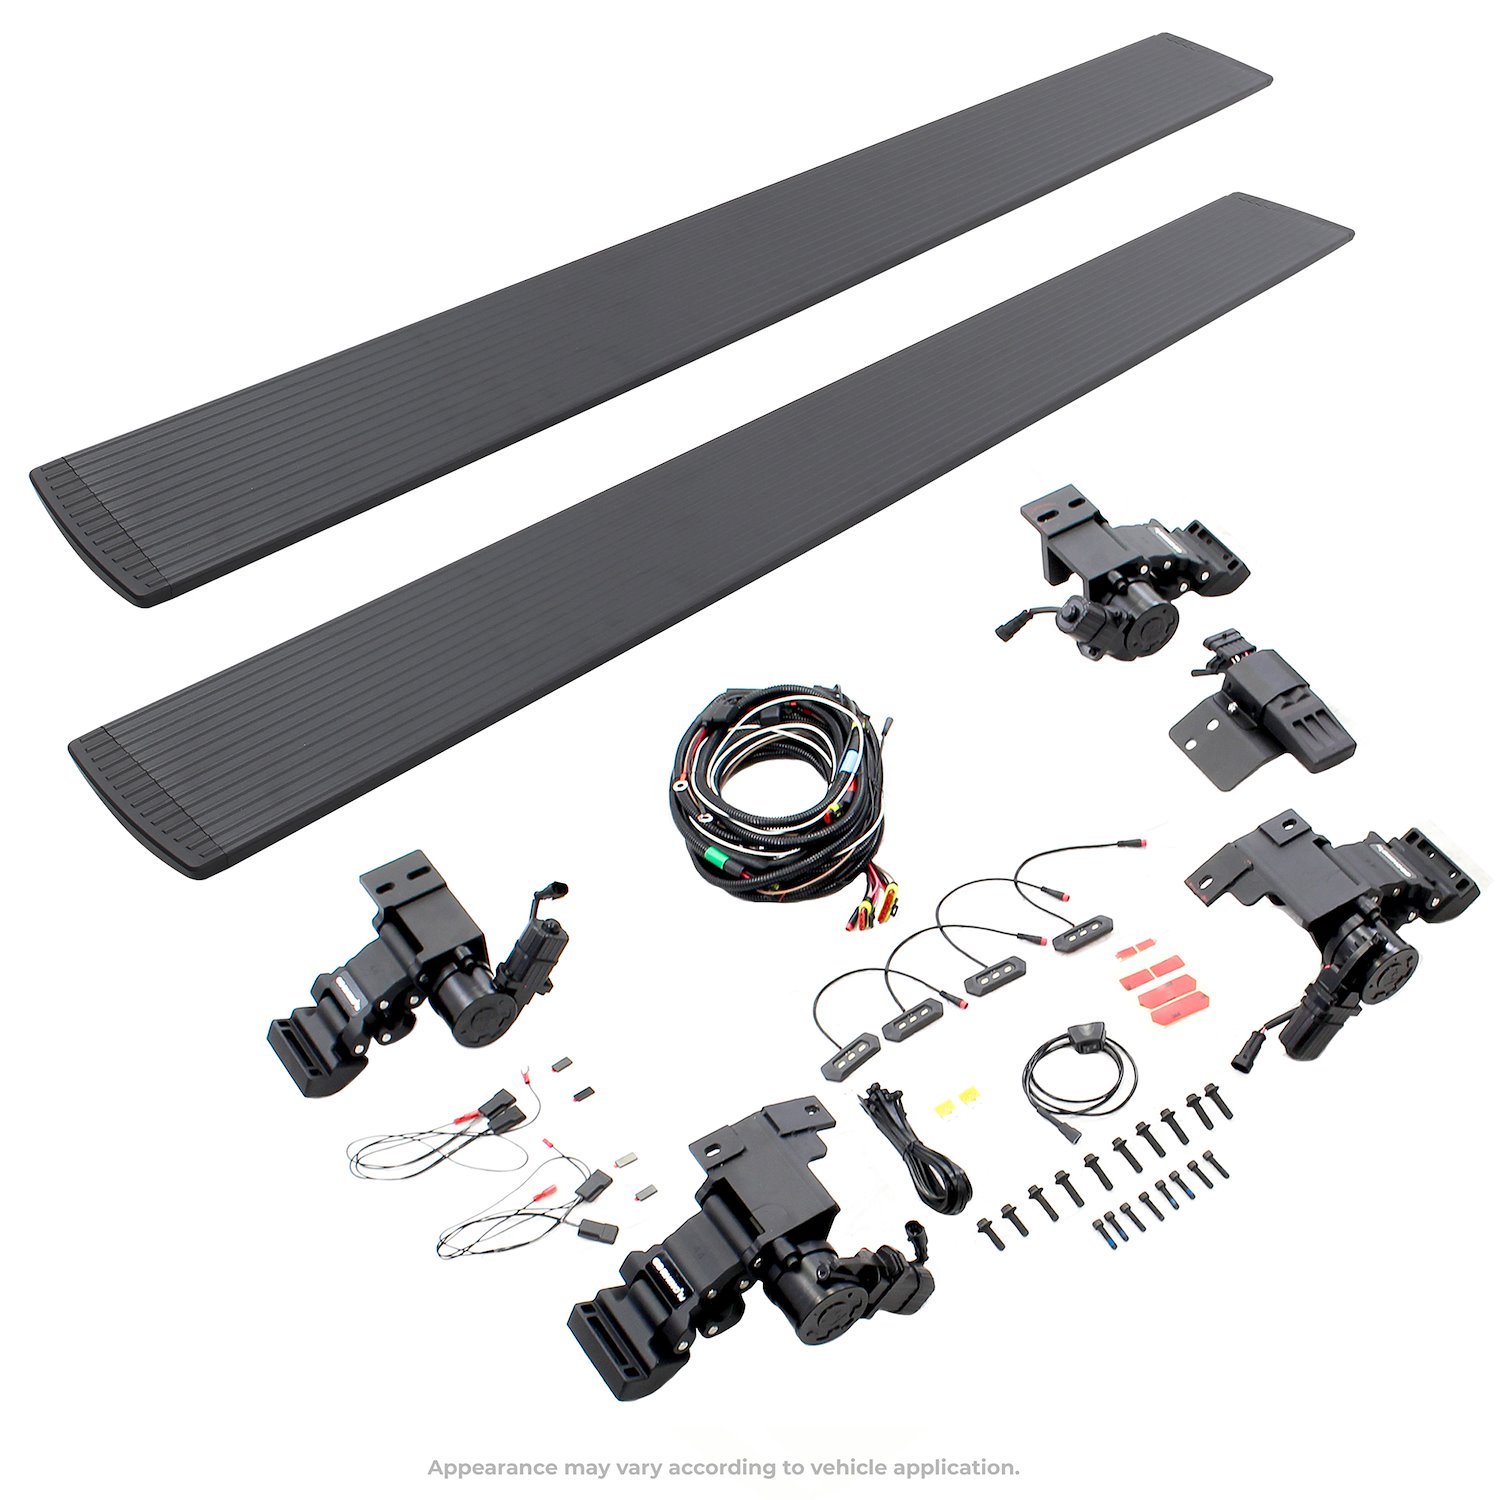 E1 Electric Running Board Kit Fits Select Ford F-150 Super Cab Pickup